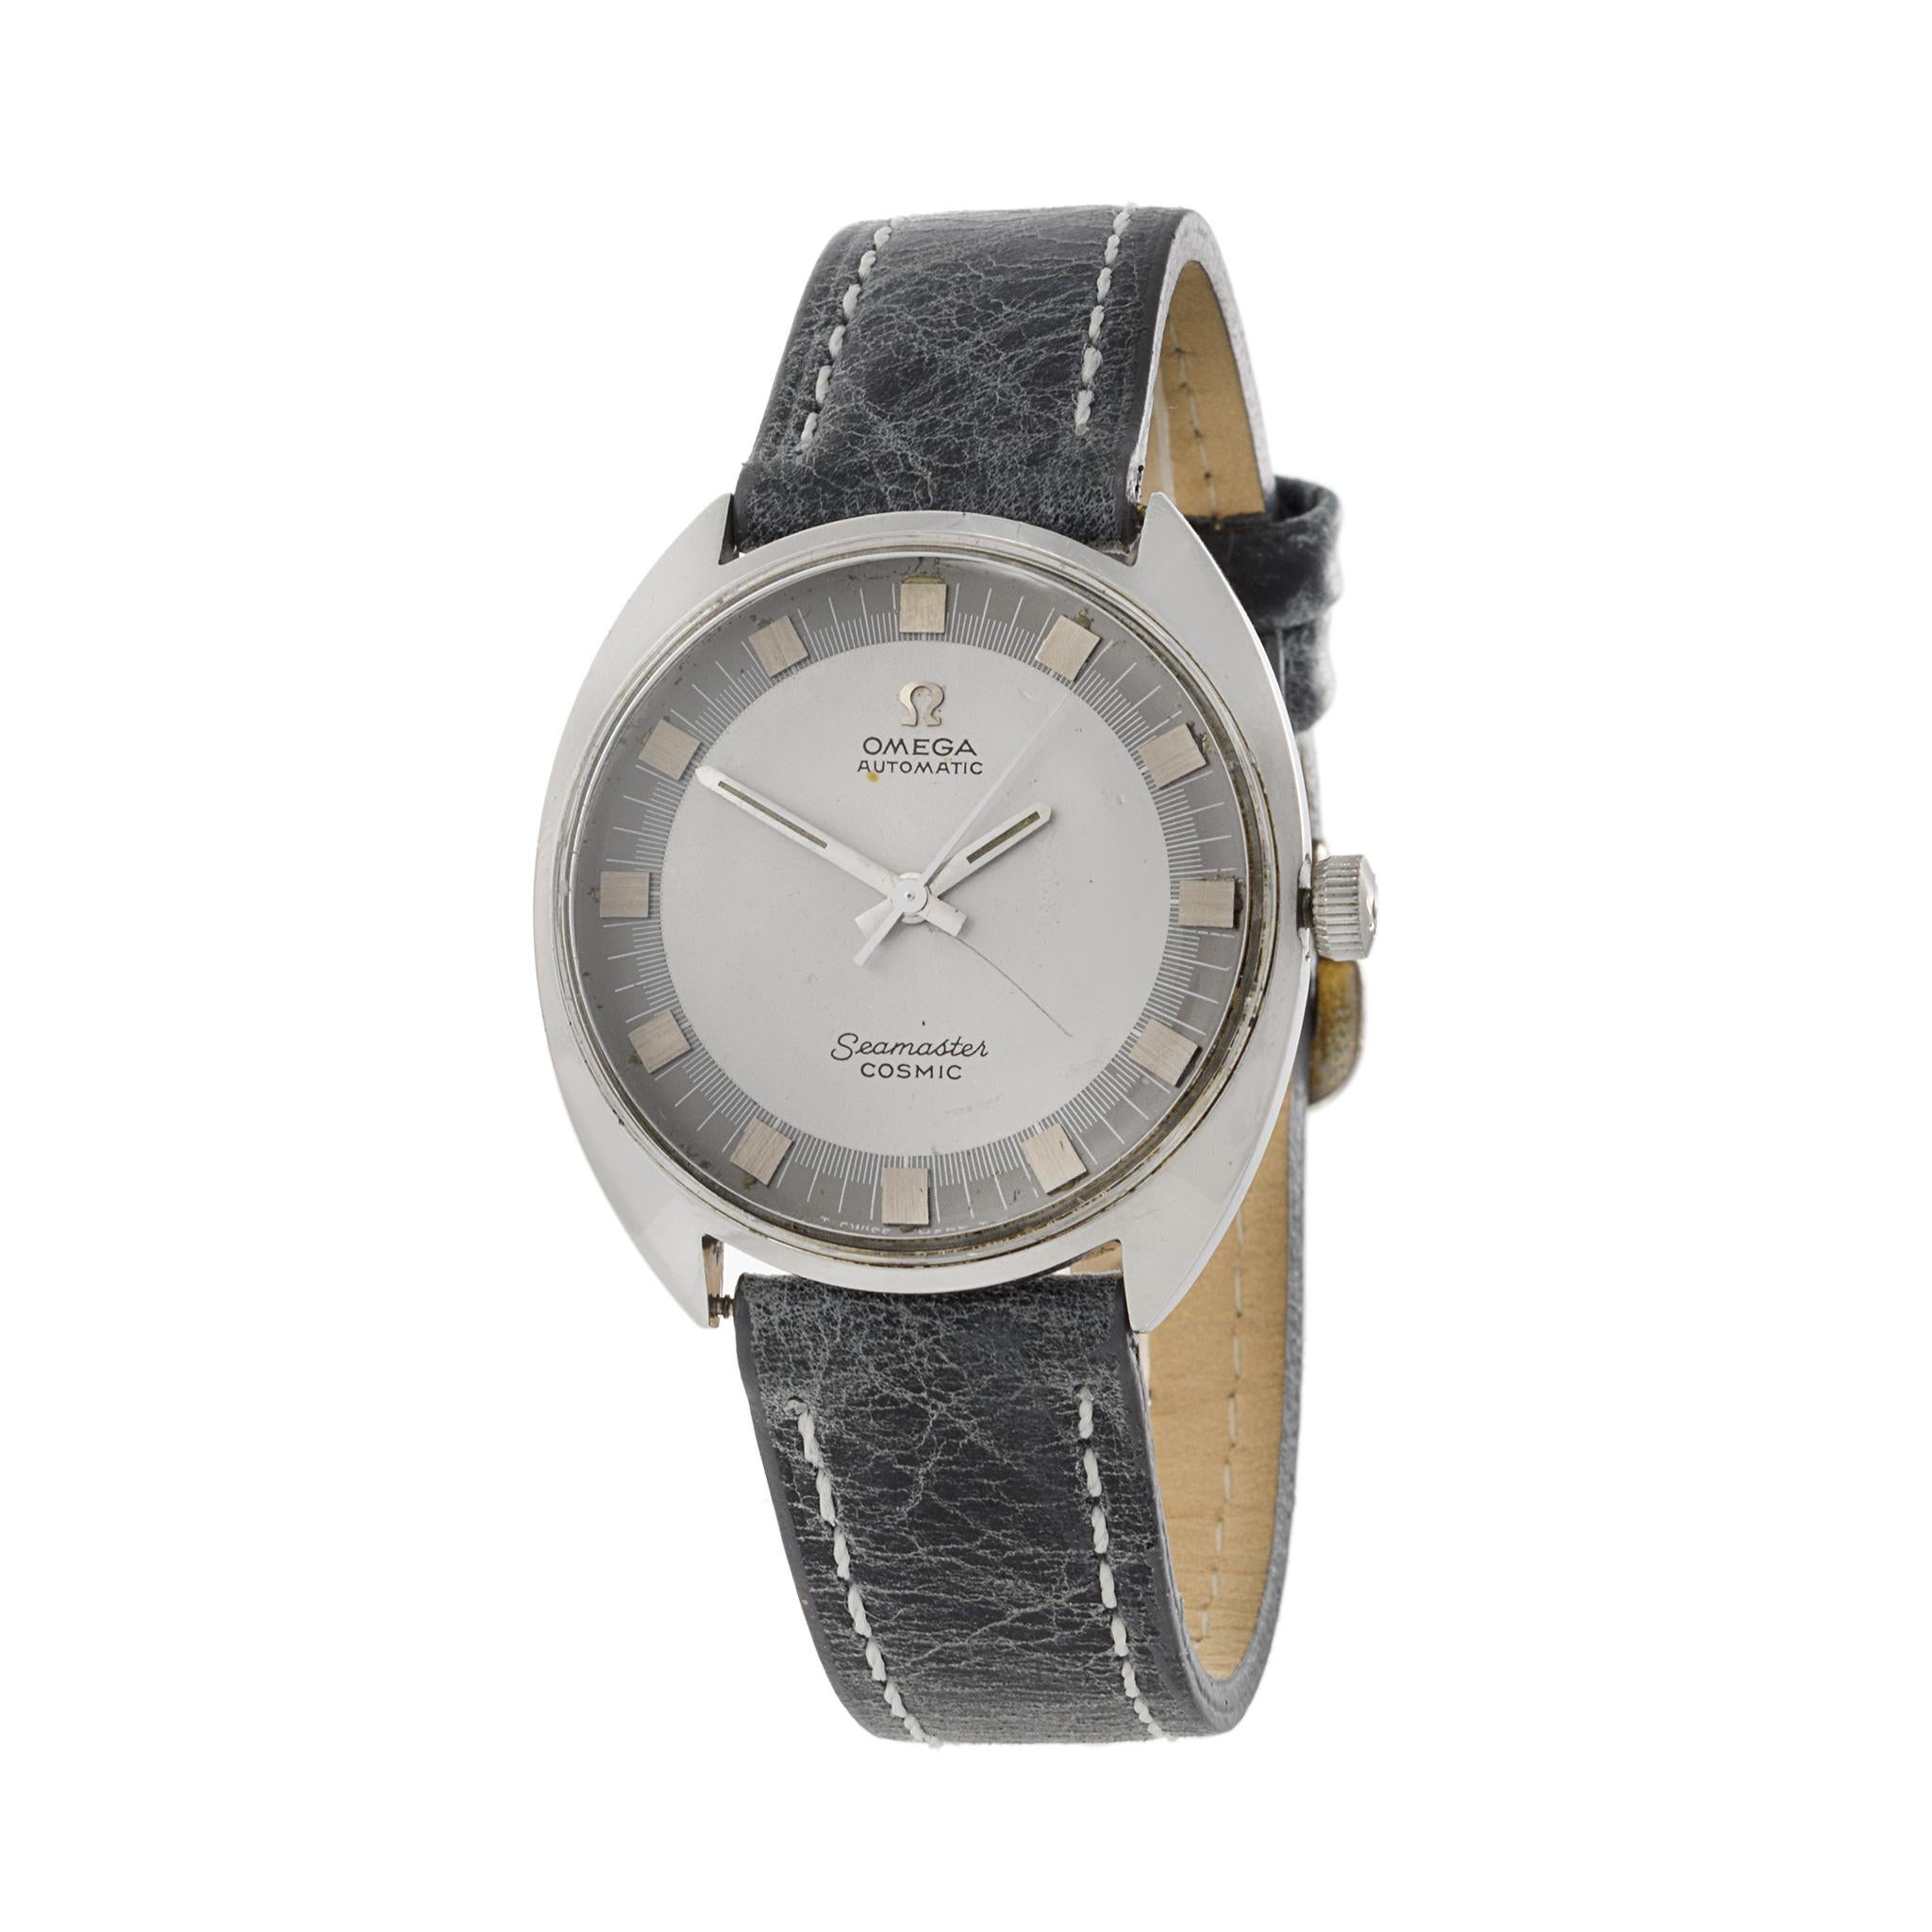 This is a nice condition Omega Cosmic Seamaster Reference 165.026 from 1966. This watch has a rare grey two tone dial. It is powered by an automatic caliber 552 movement. 

The steel case of this watch measures 35mm and is unpolished. The Cosmic